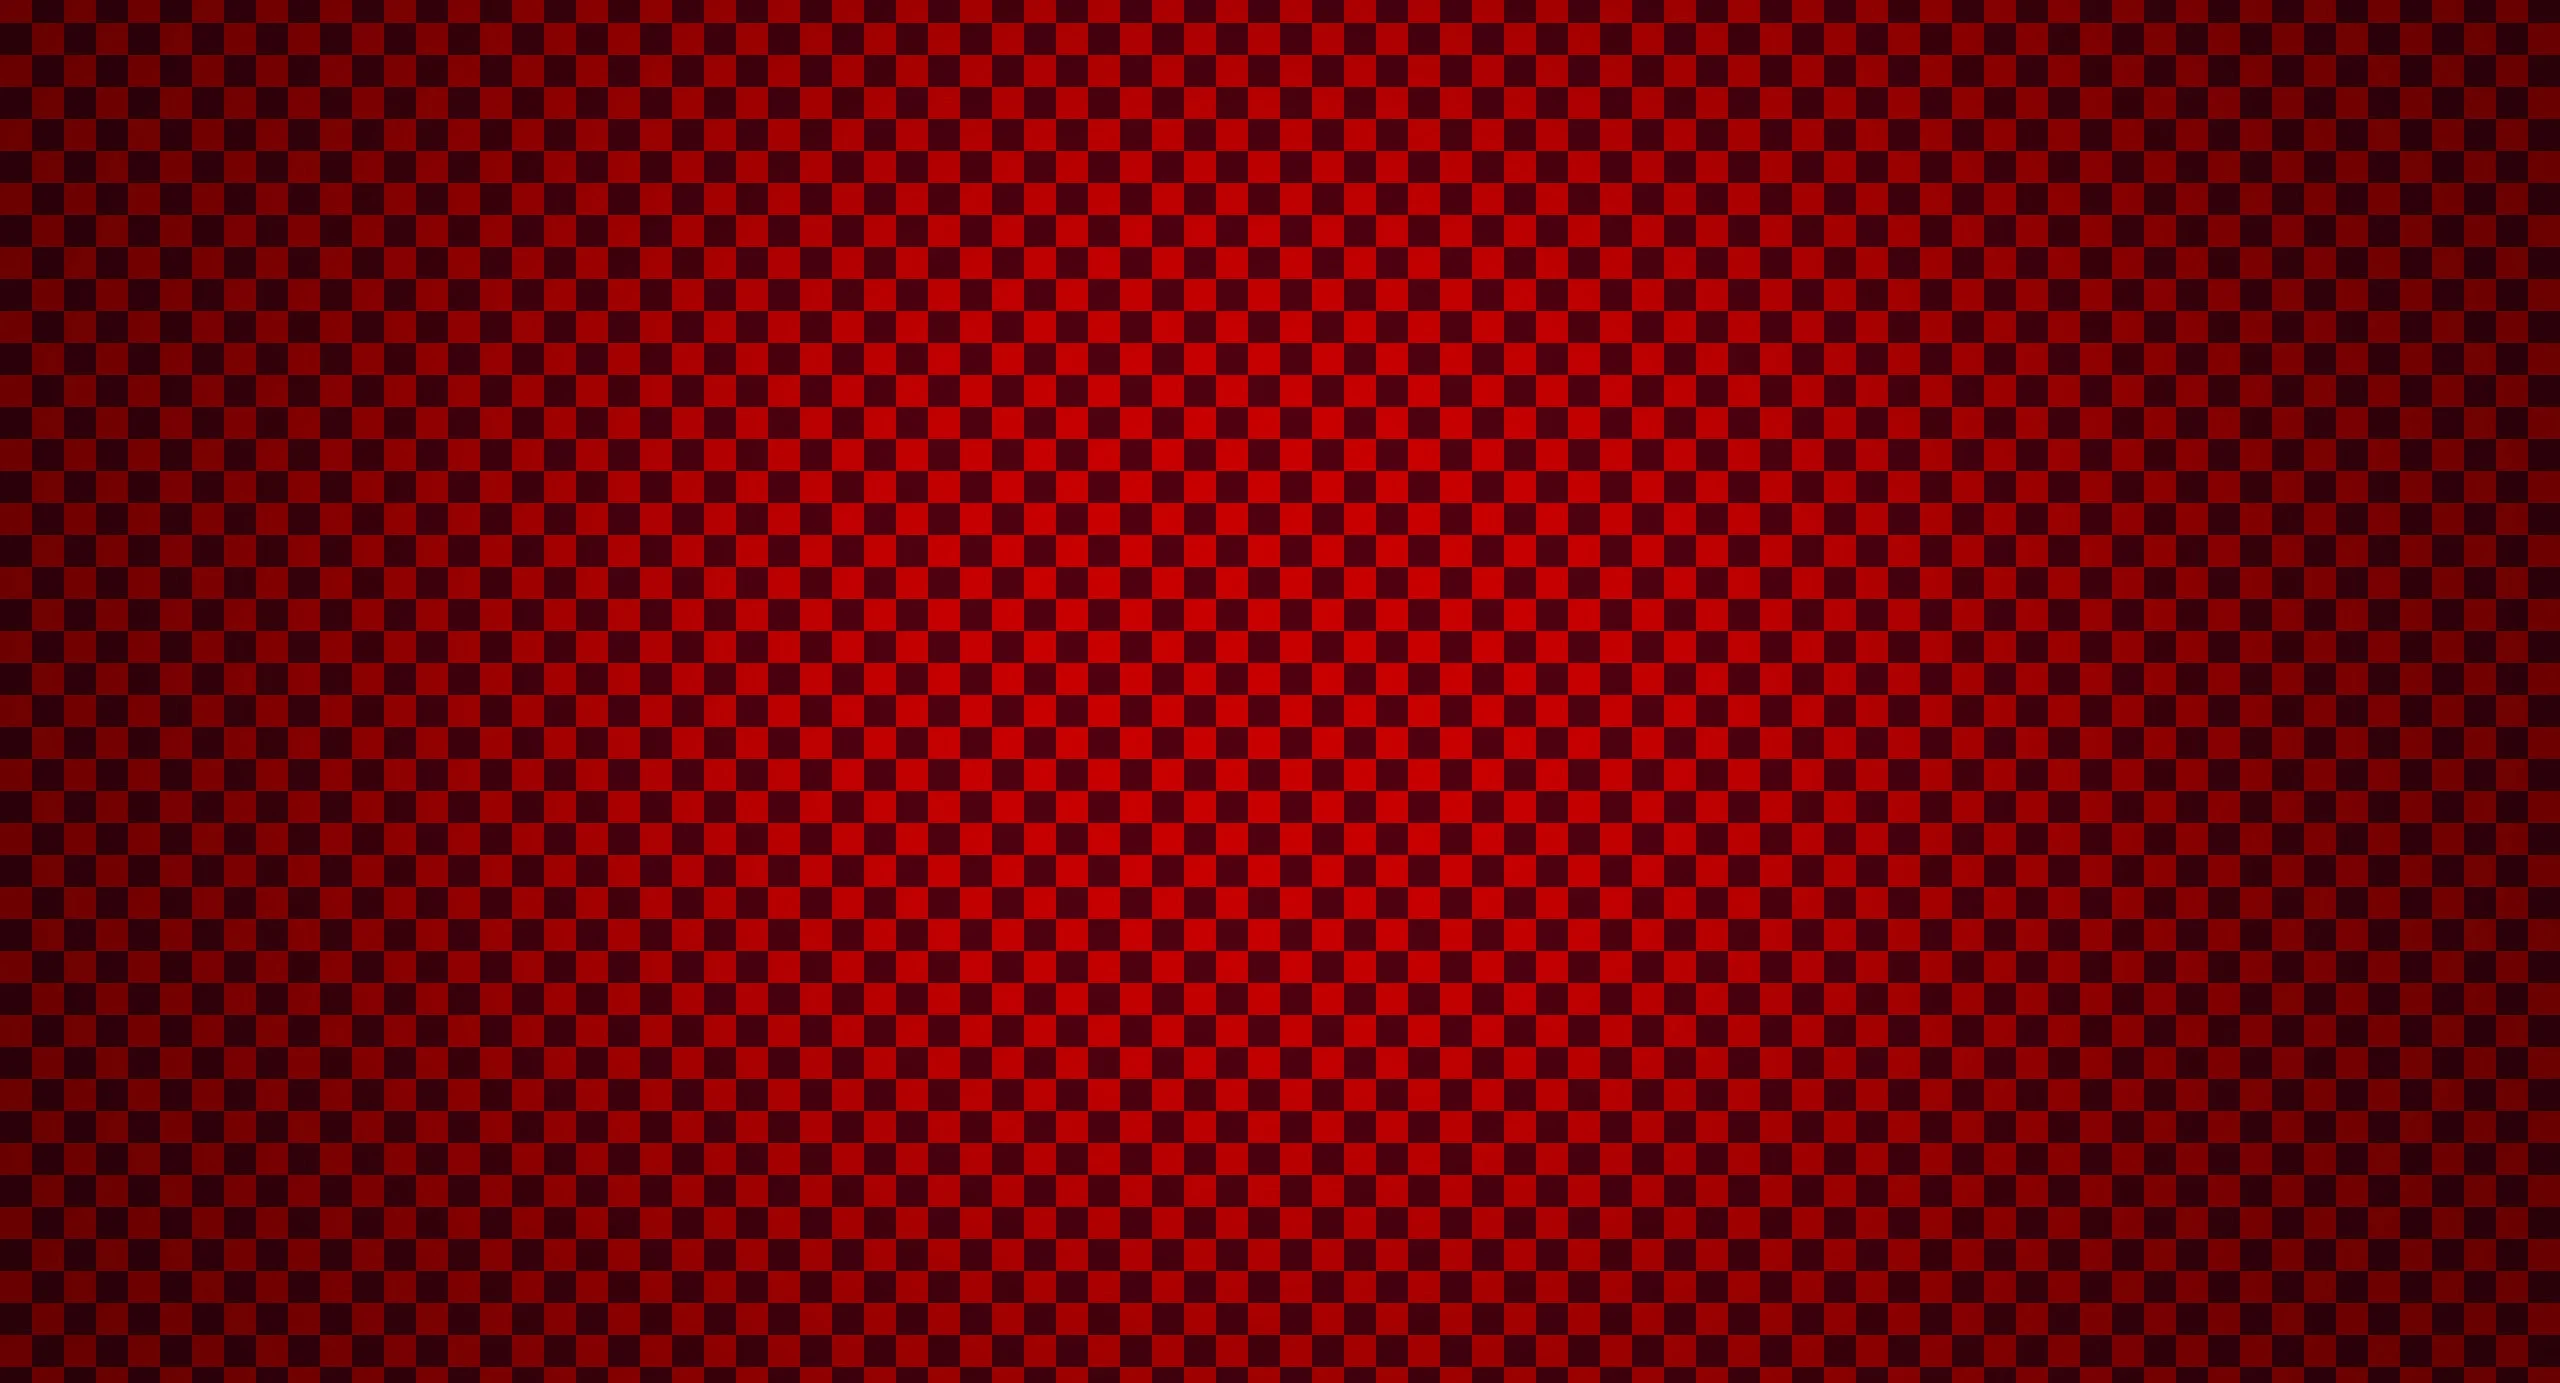 Download 2560×1440 Android Logo On A Checkered Background Wallpaper